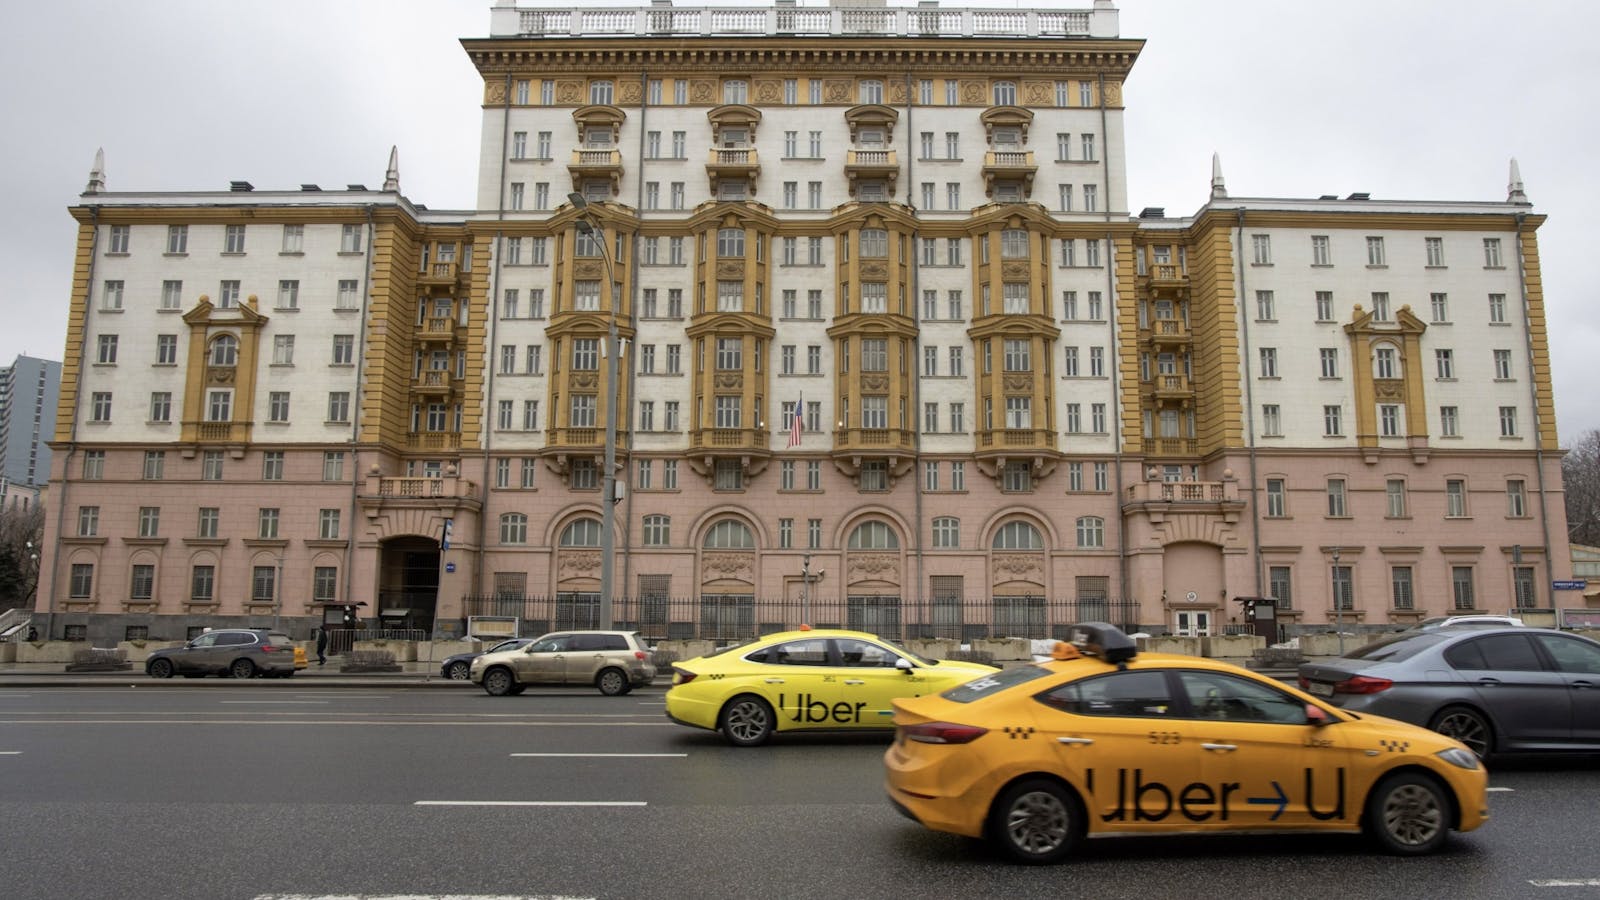 Taxis operated by the Yandex-Uber joint venture in Moscow last week. Photo by Bloomberg.